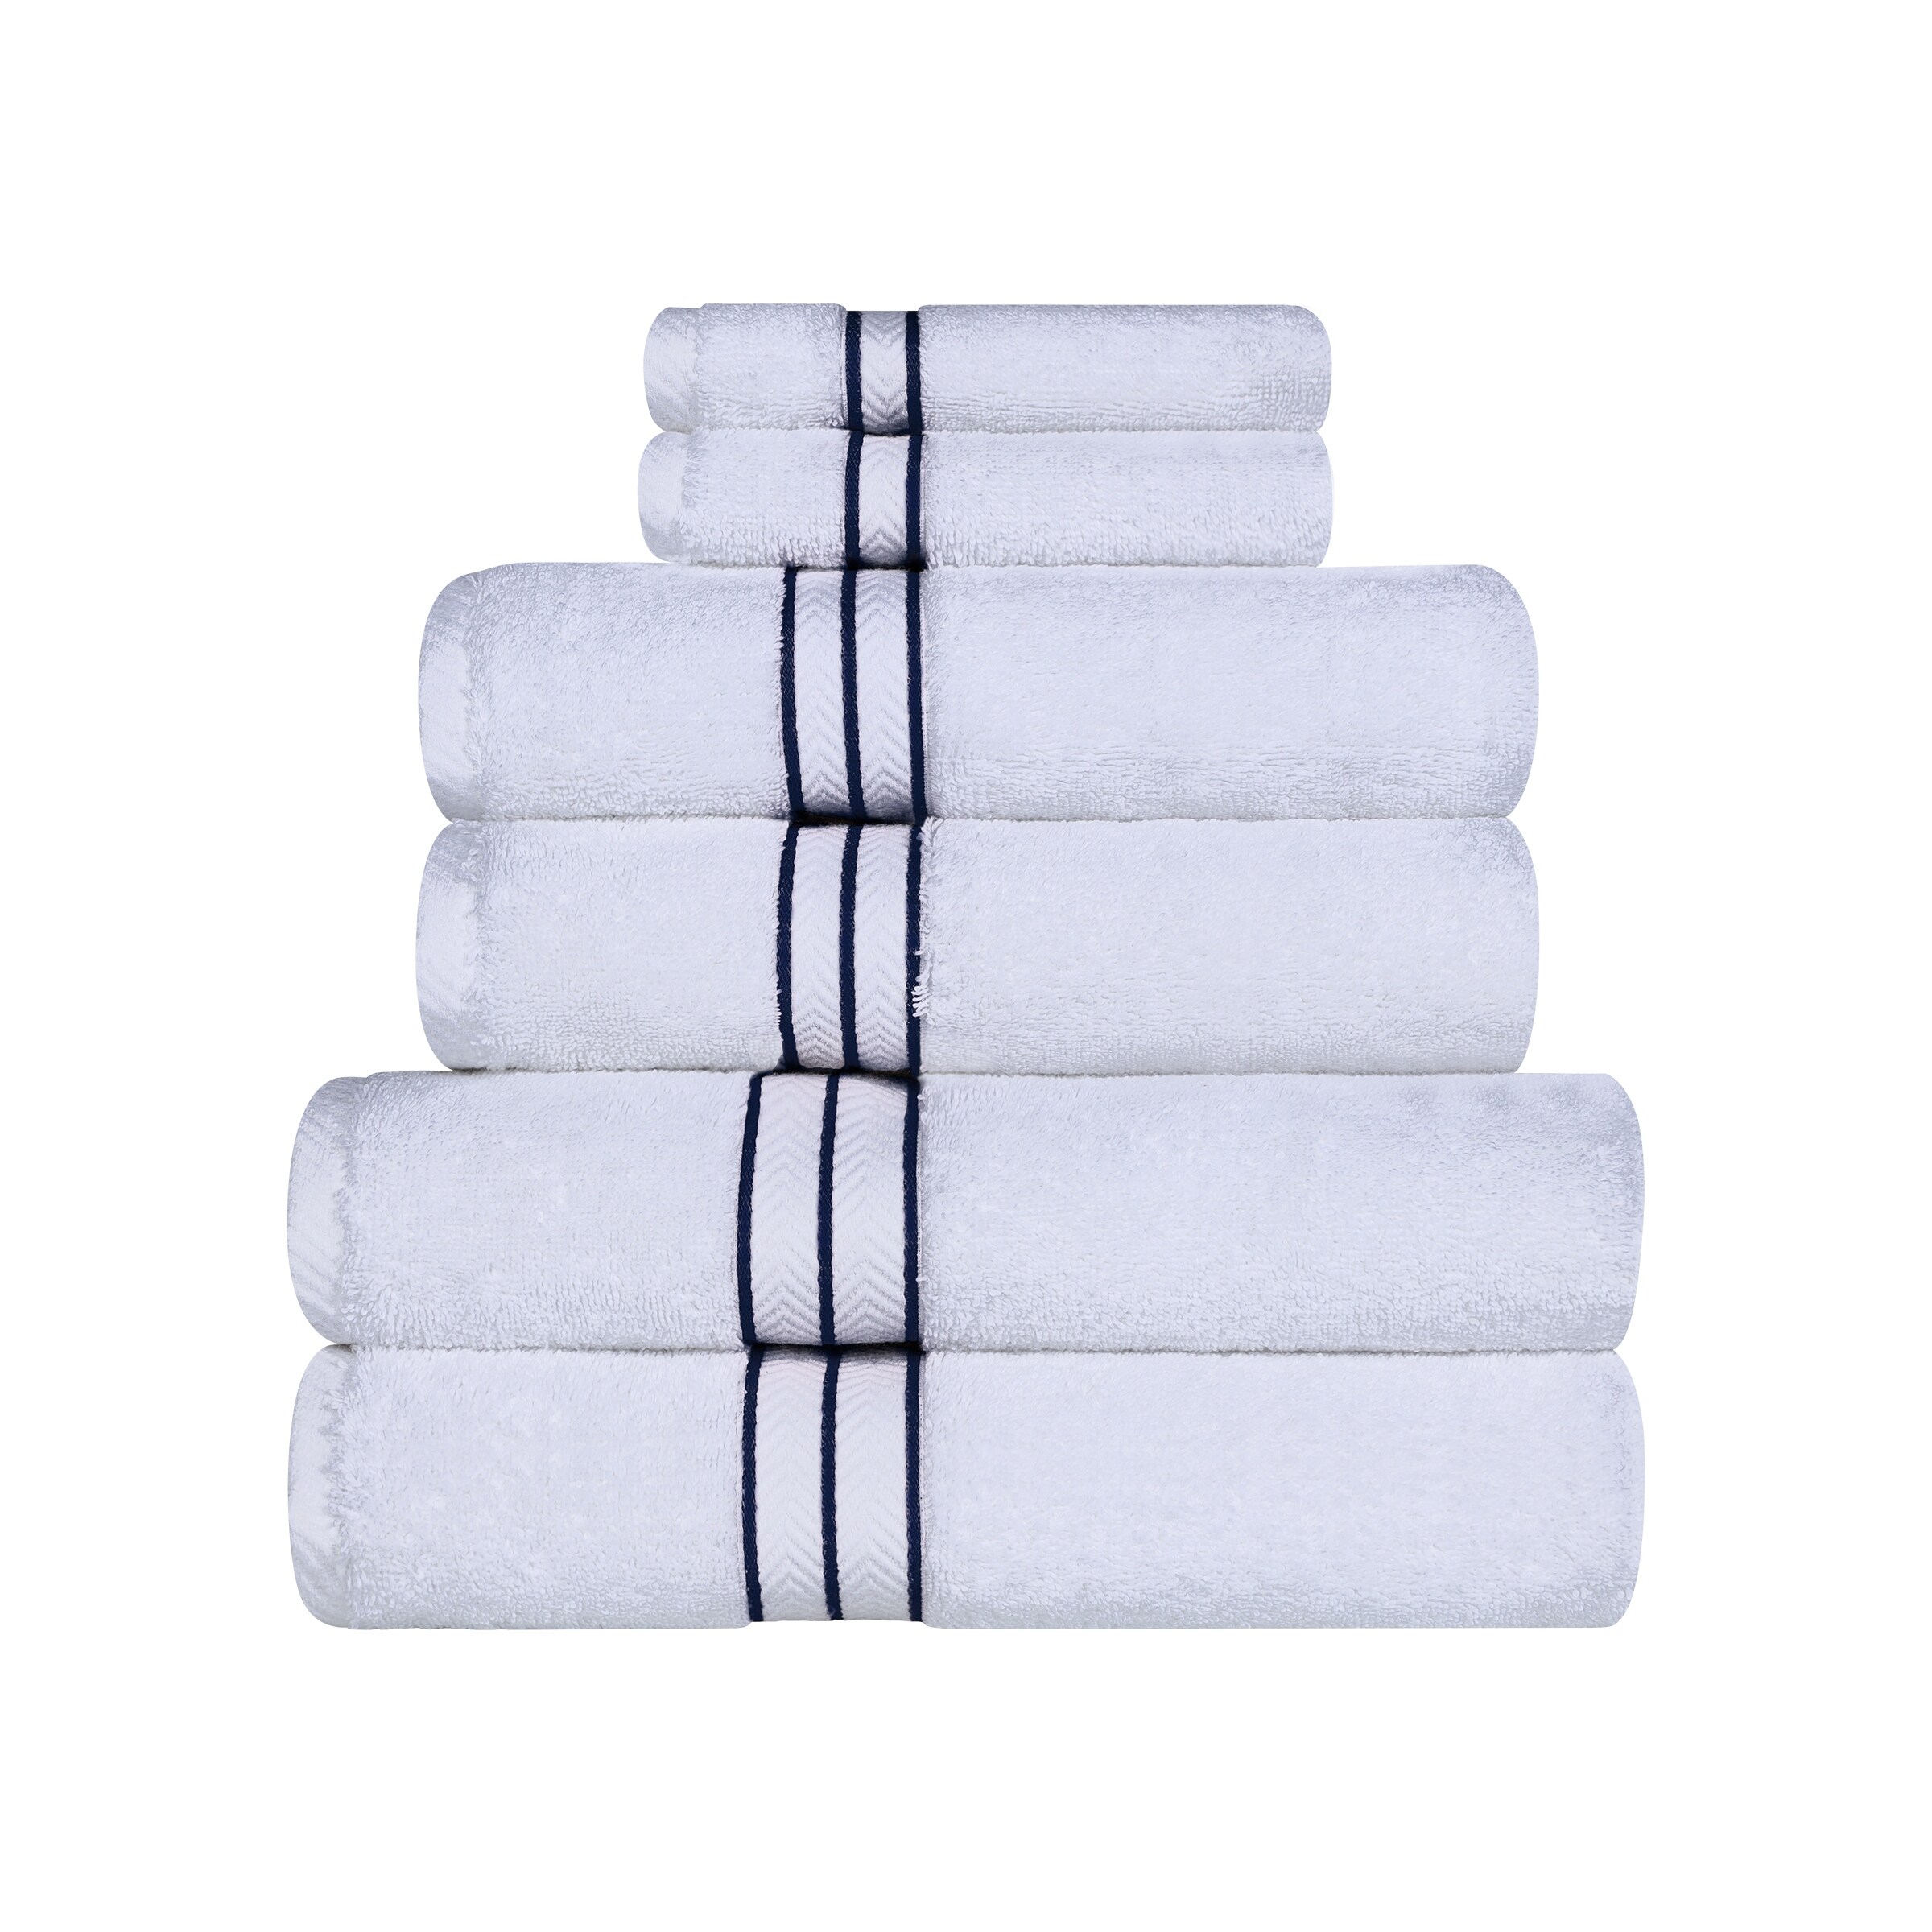 https://ak1.ostkcdn.com/images/products/is/images/direct/de8a9f912603942c49f864c52fc9f44871aab236/Turkish-Cotton-6-Piece-Absorbent-Heavyweight-Towel-Set-by-Superior.jpg